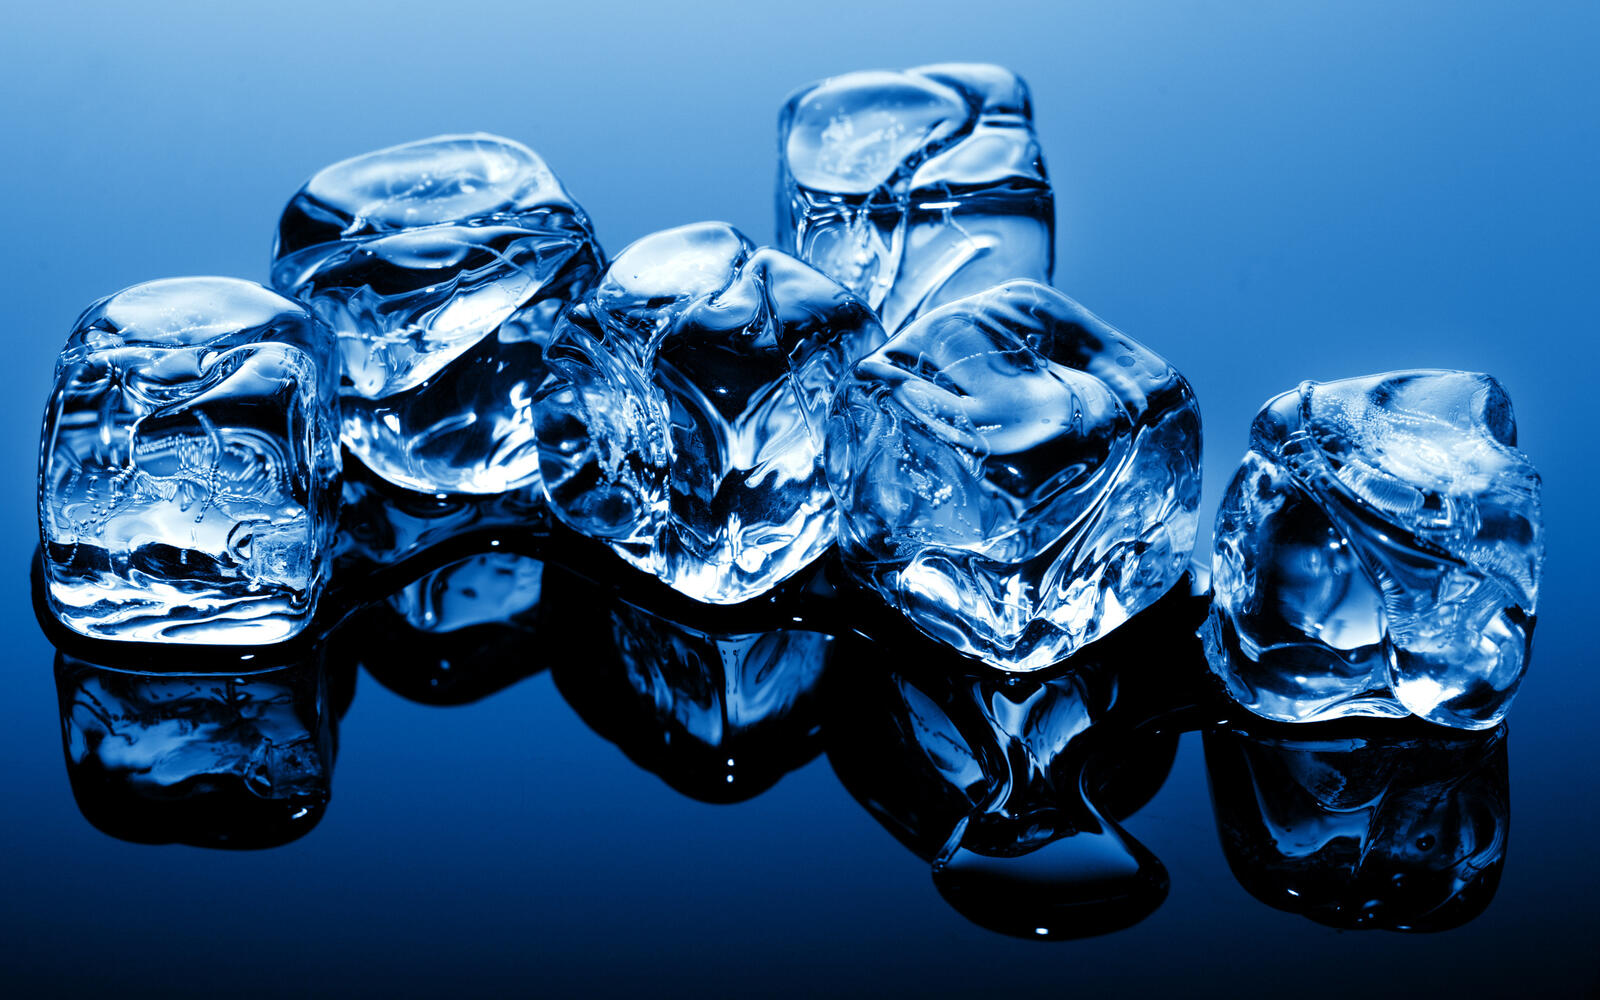 Wallpapers ice cubes ice surface on the desktop